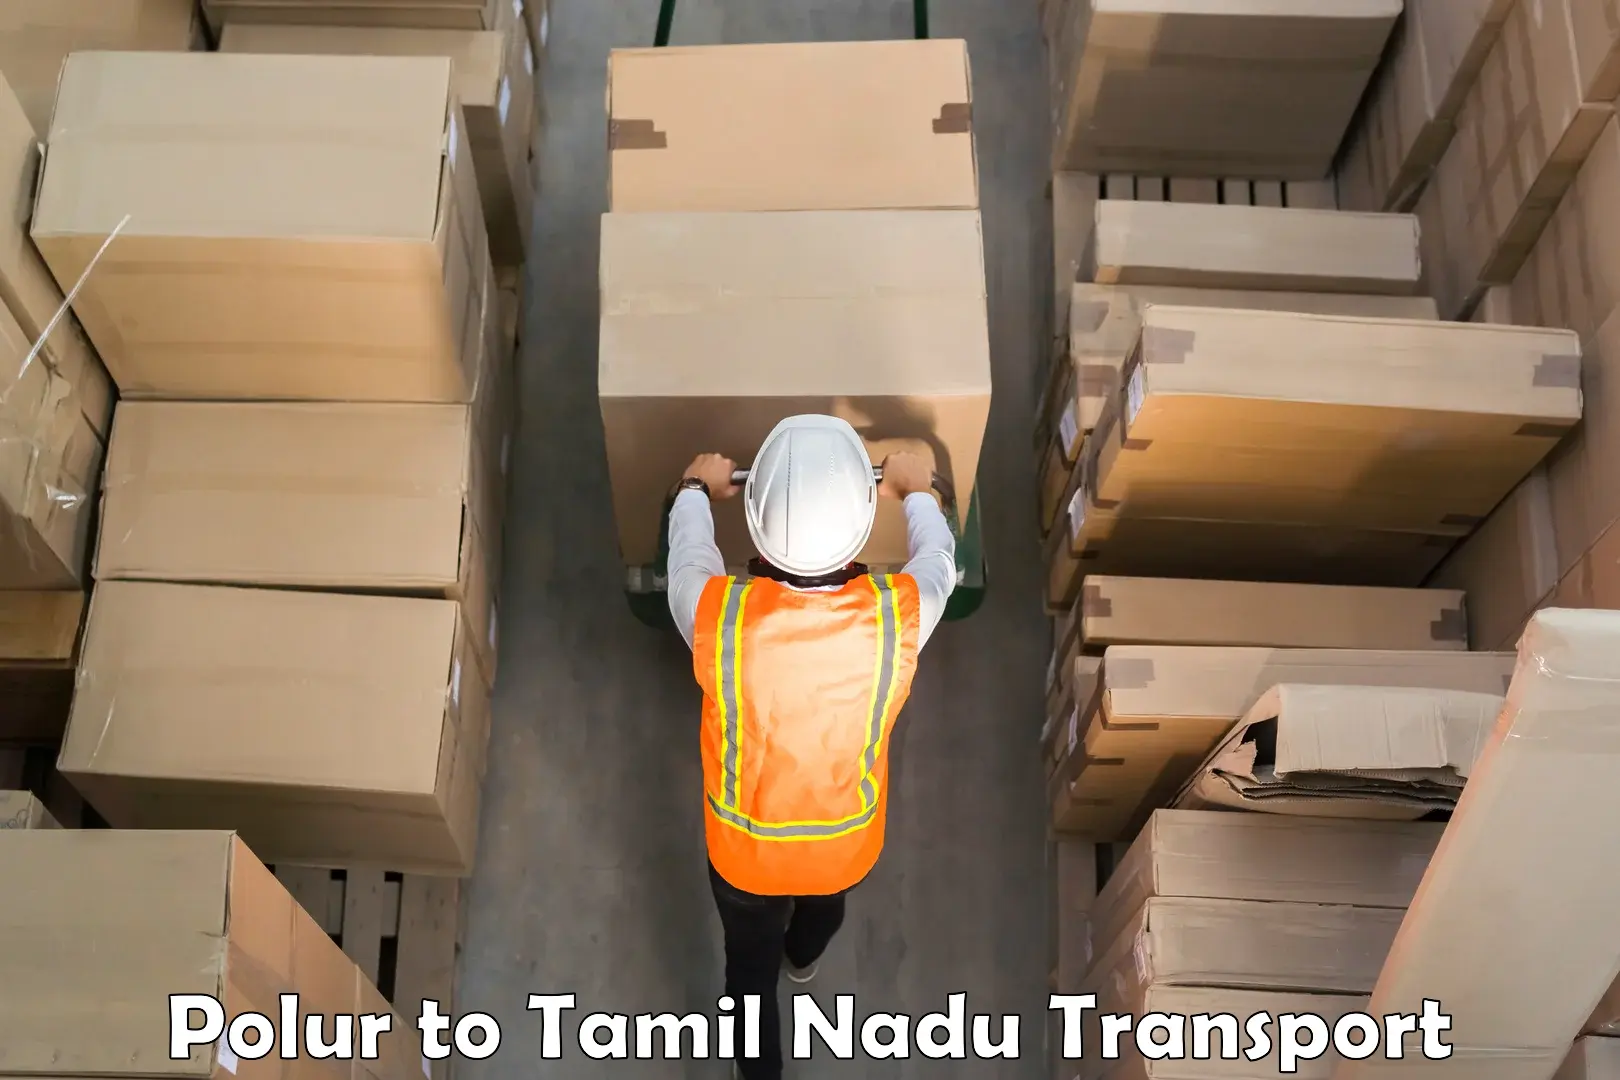 Road transport online services Polur to Dindigul